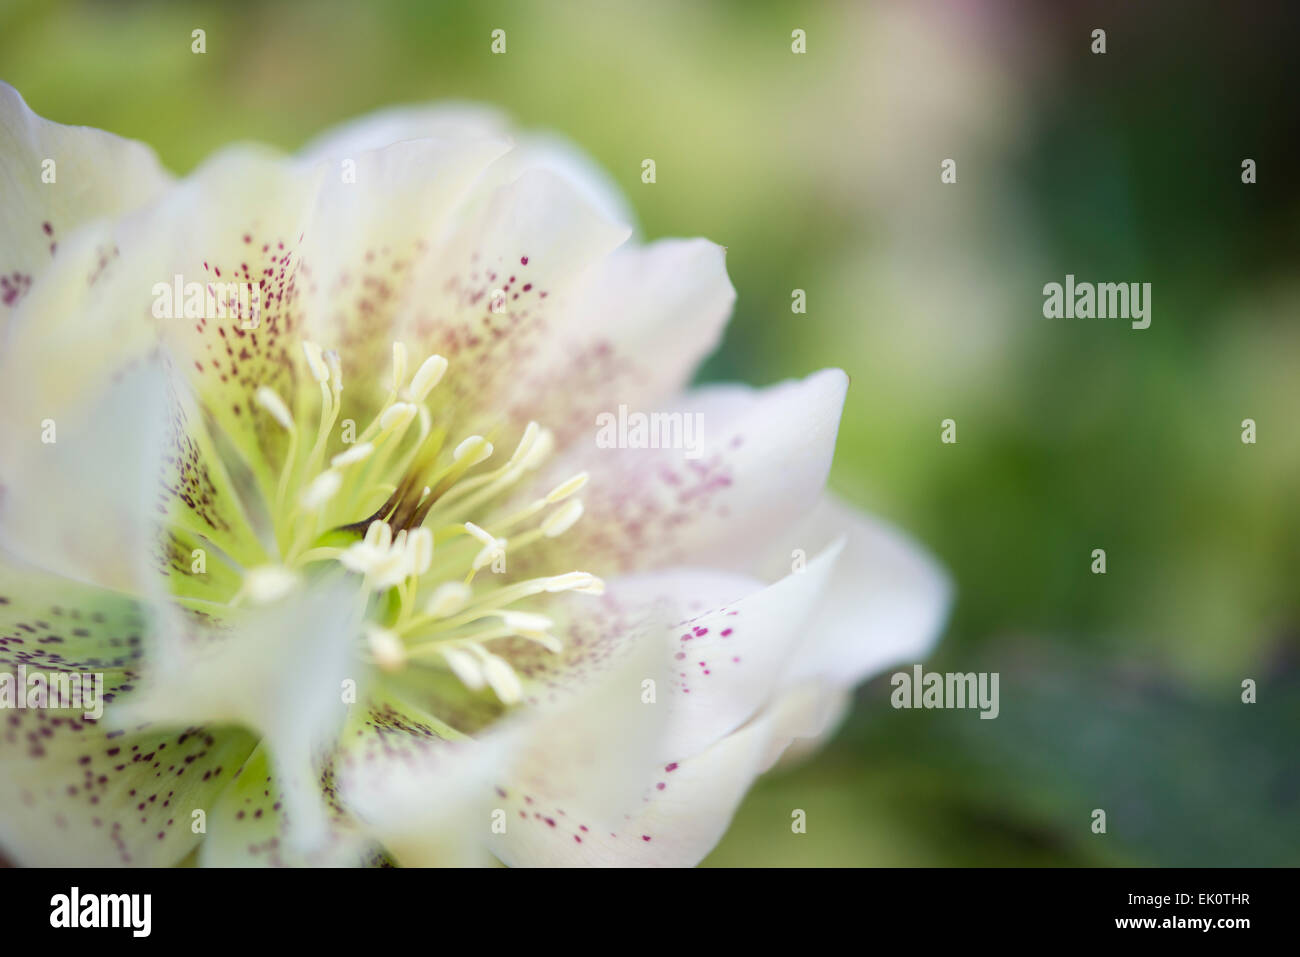 A double white Hellebore flower with spotted petals. Extreme close up with soft green background. Stock Photo